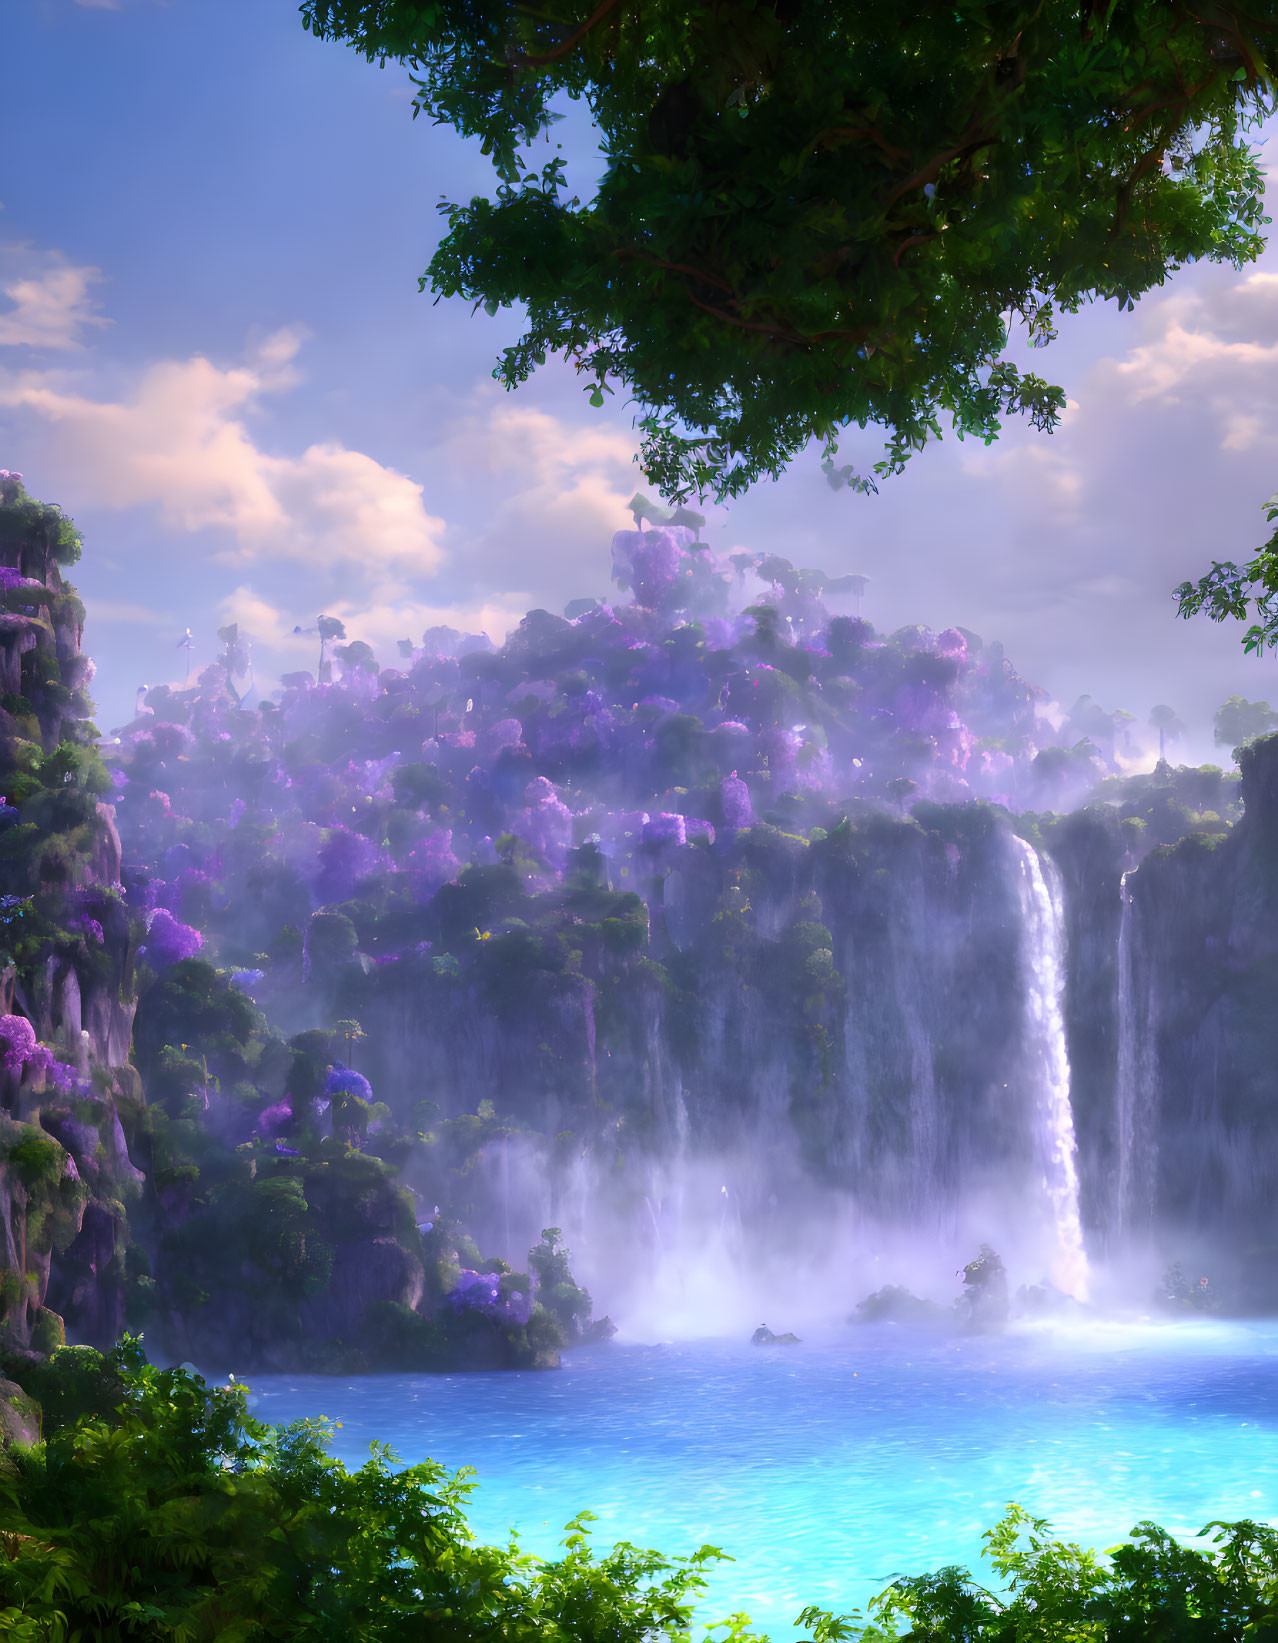 Tranquil fantasy landscape with waterfall, purple flora, trees, and turquoise lake